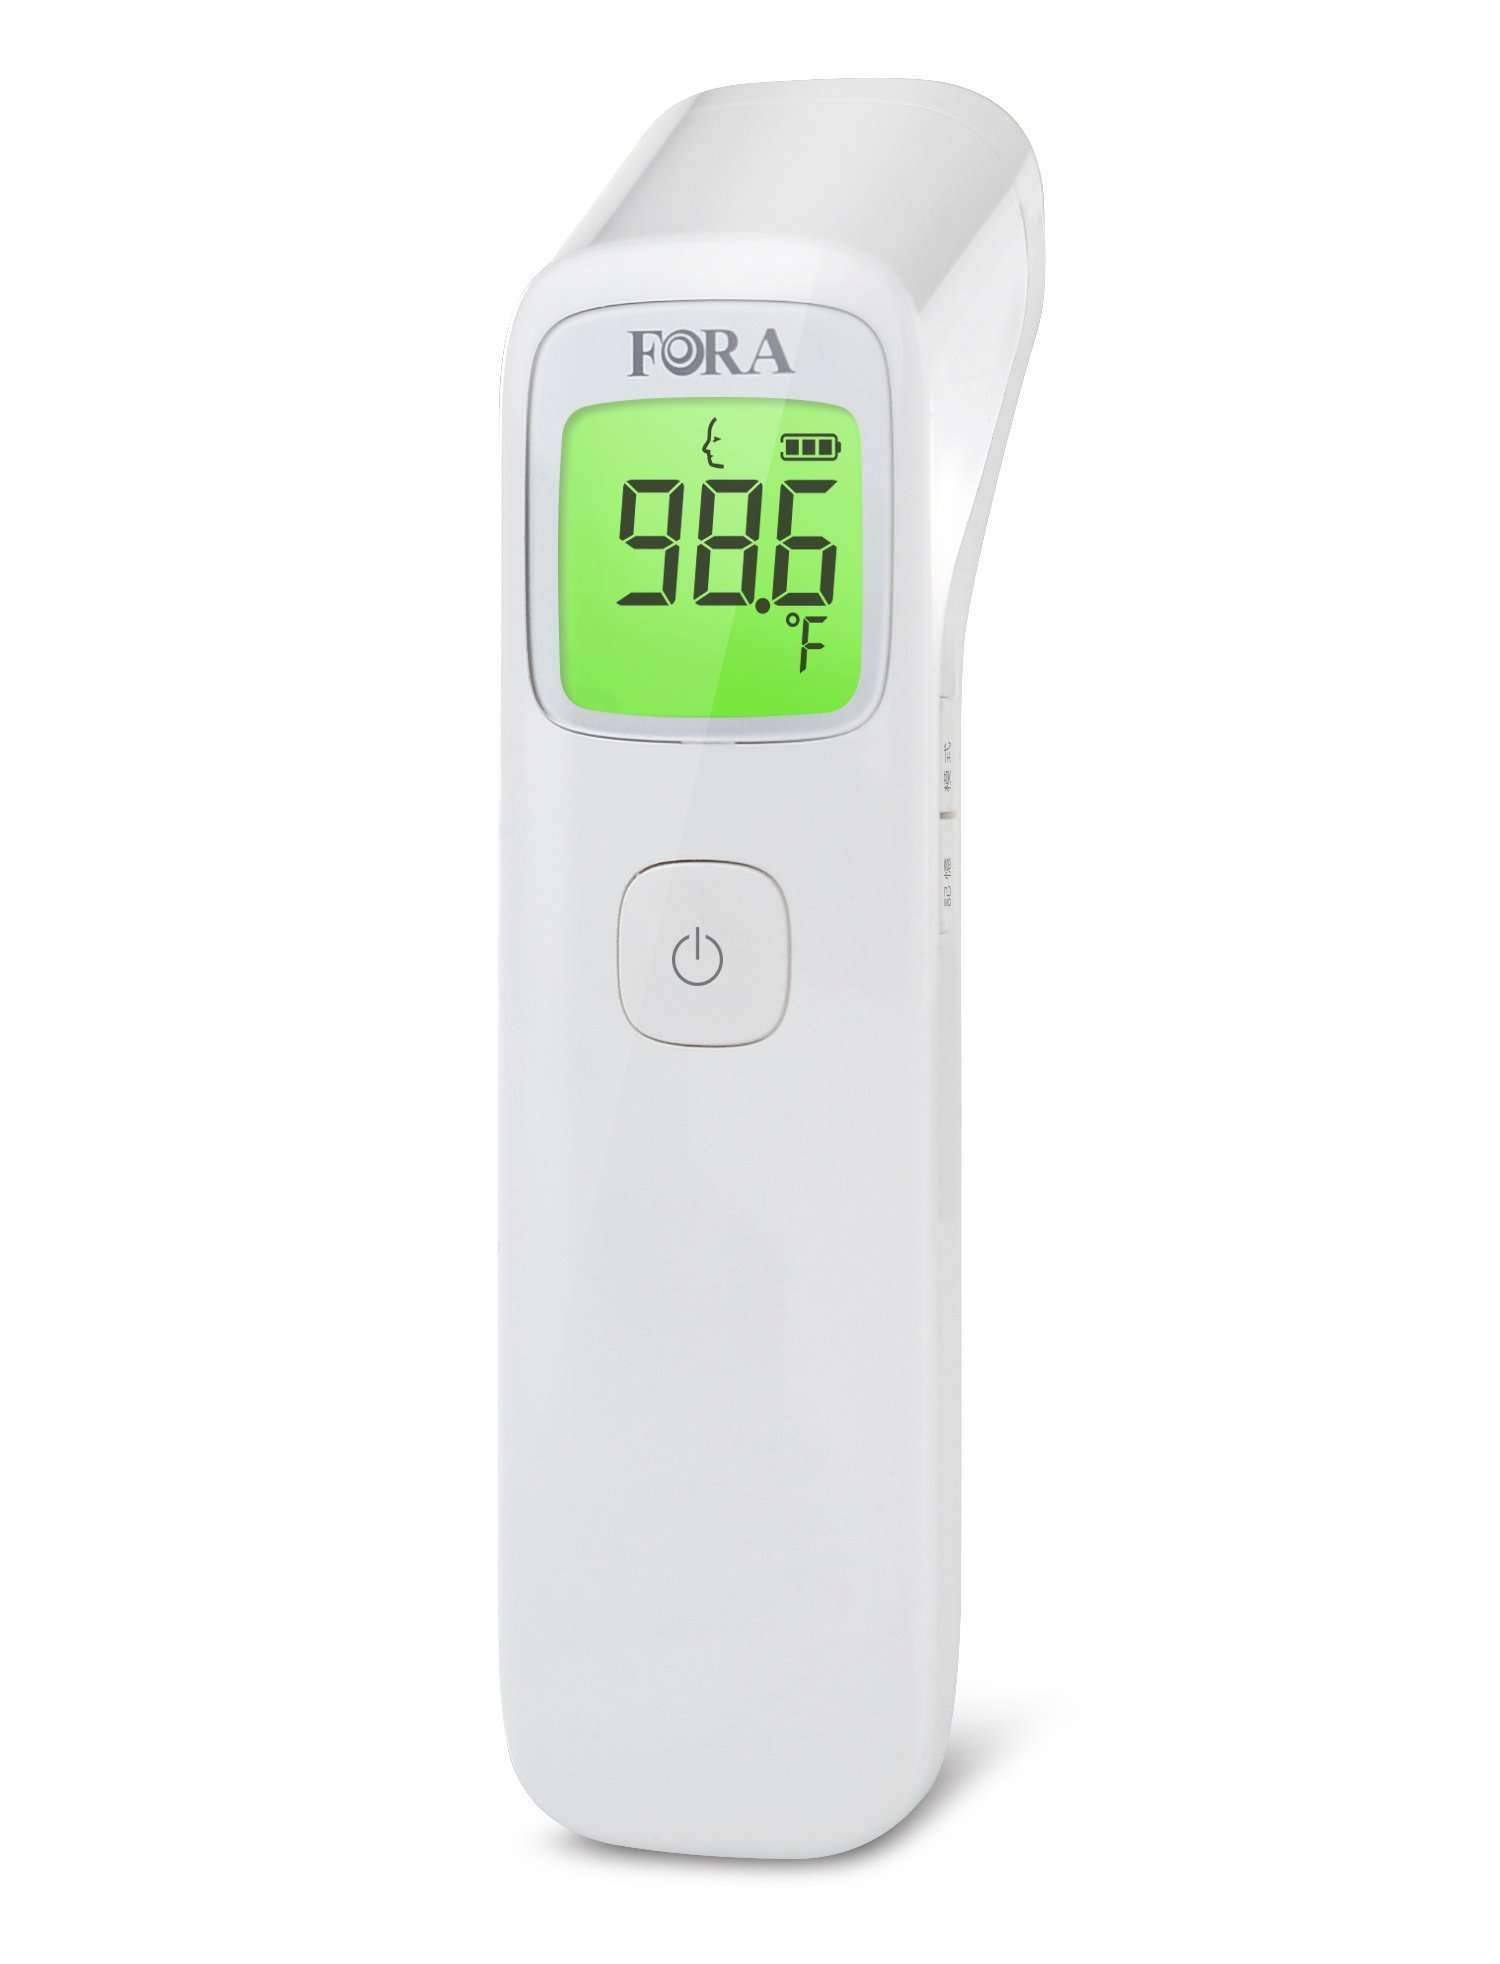 Fora Forehead Thermometer